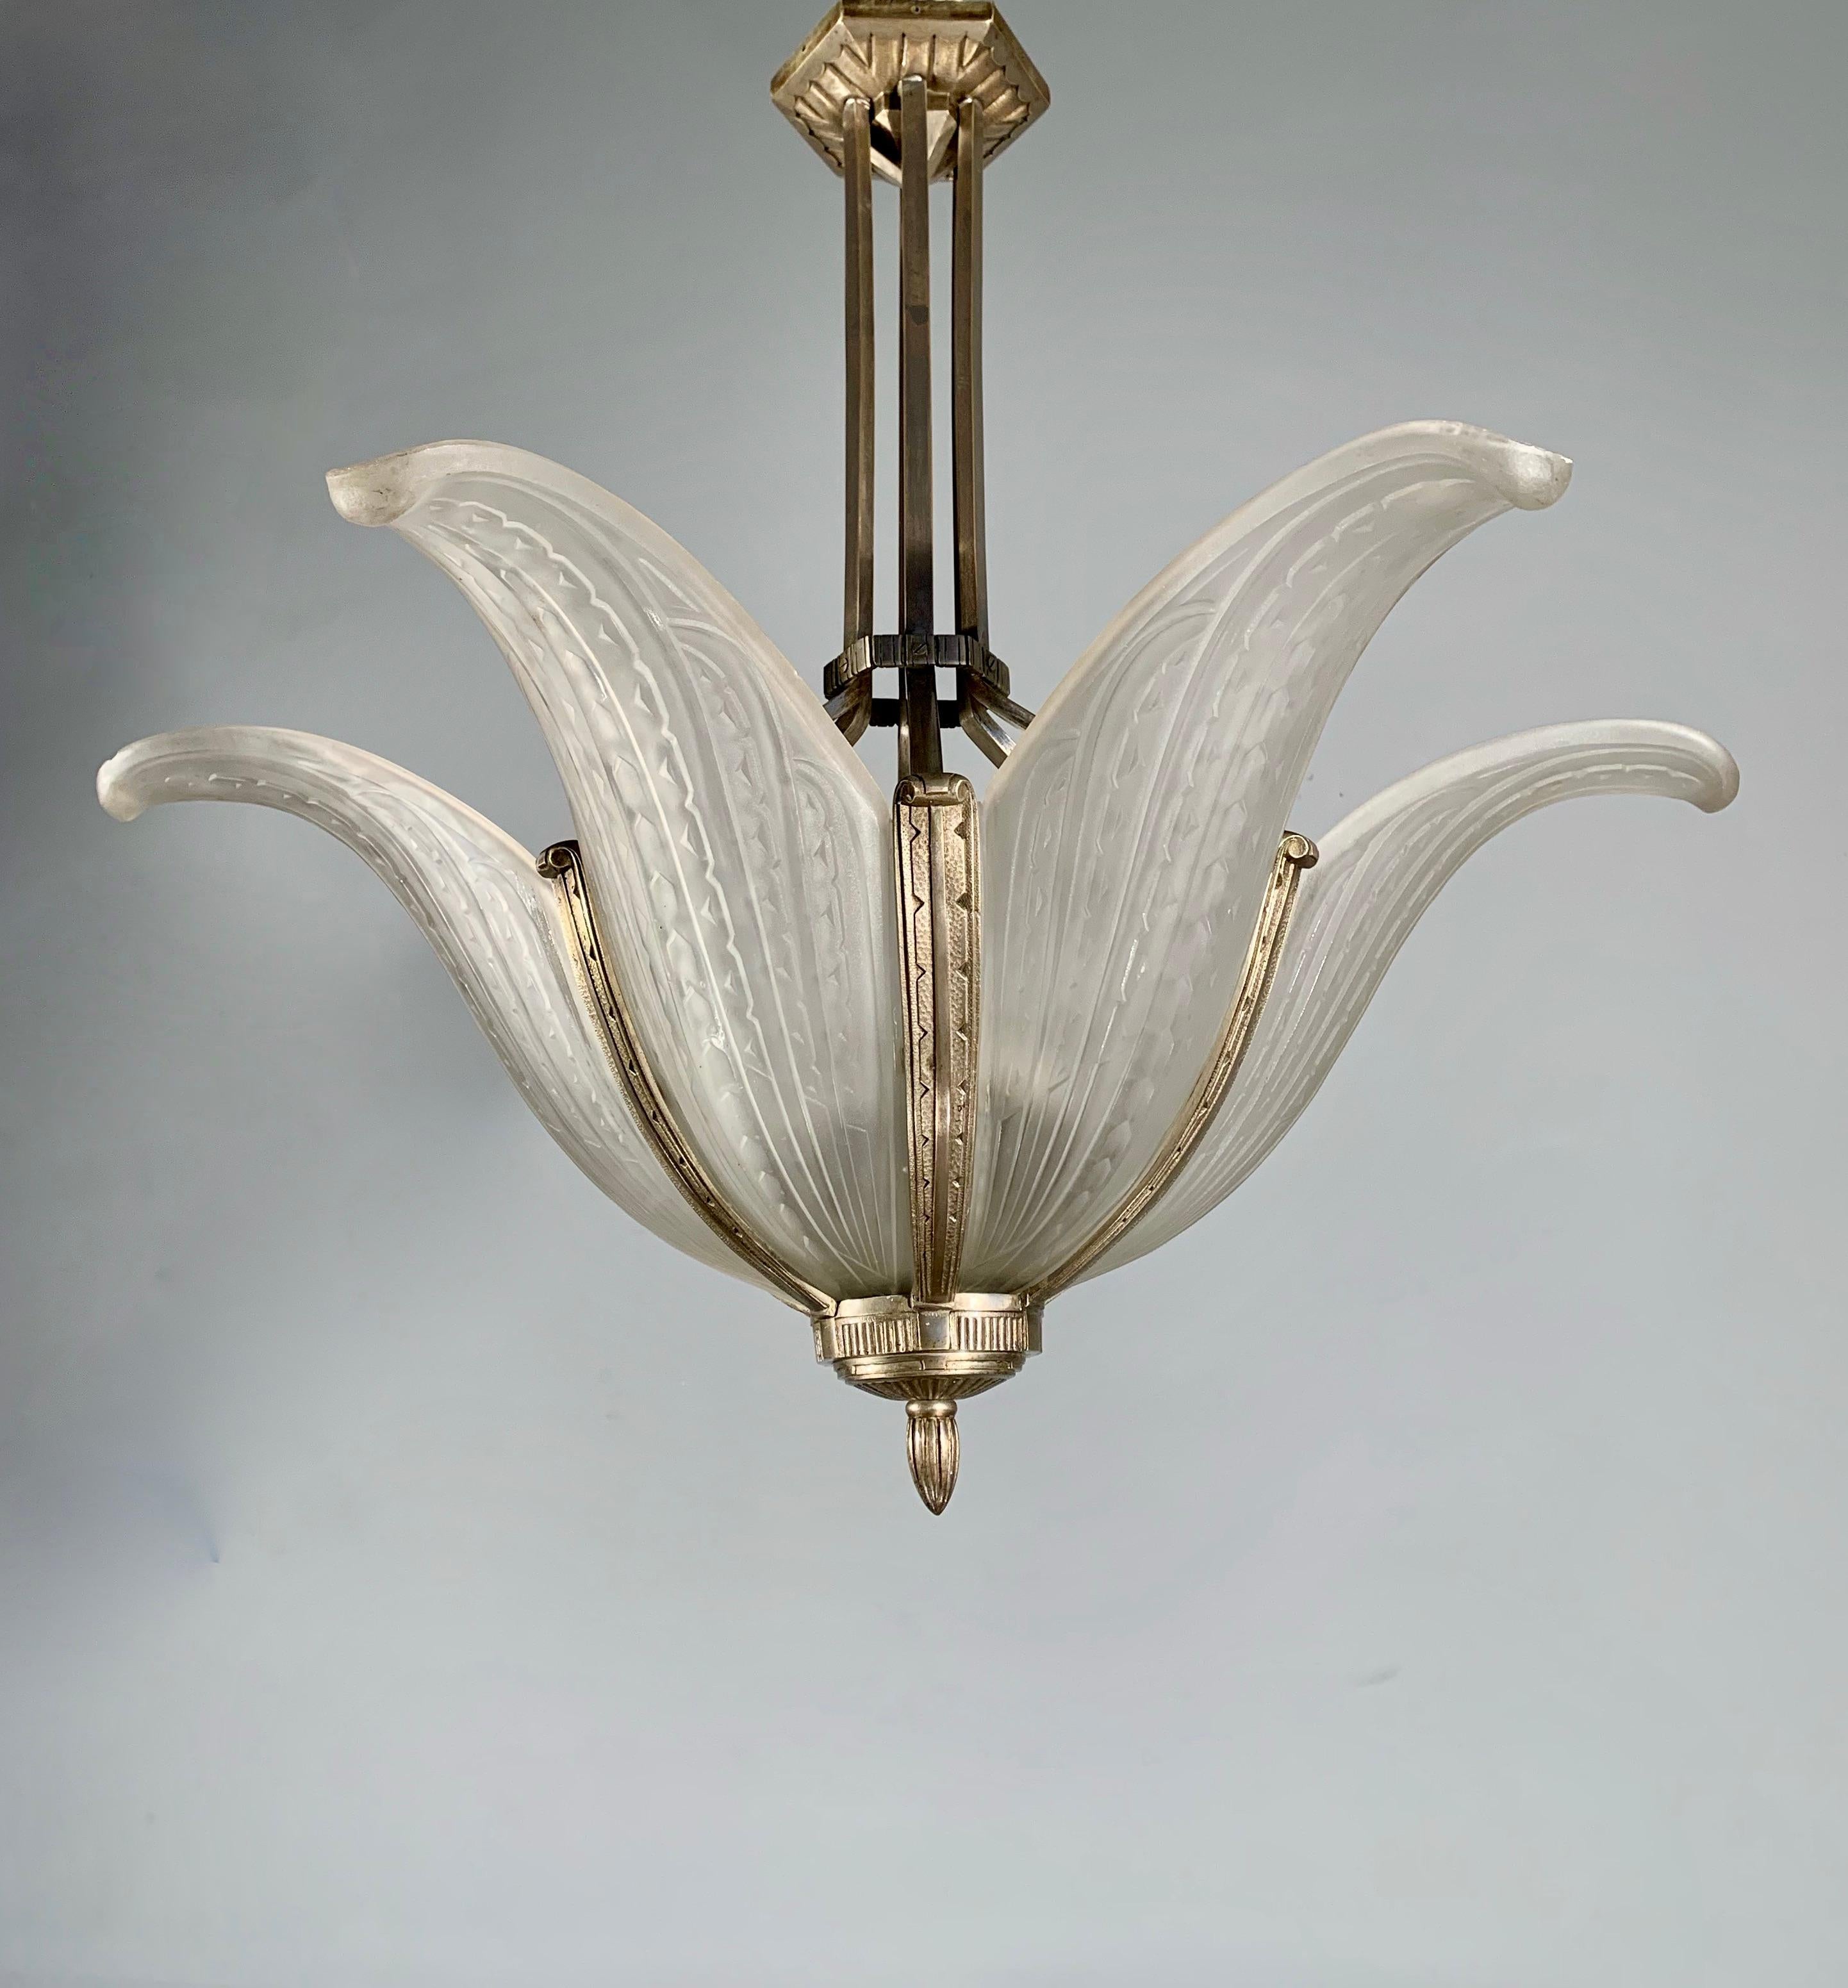 Another bargain for the collectors of top quality Parisian Art Deco pendants.

This stunning, Art Deco palm tree design, bronze and glass chandelier is by one of France's finest when it comes to Art Deco light fixtures. For the rich and famous,